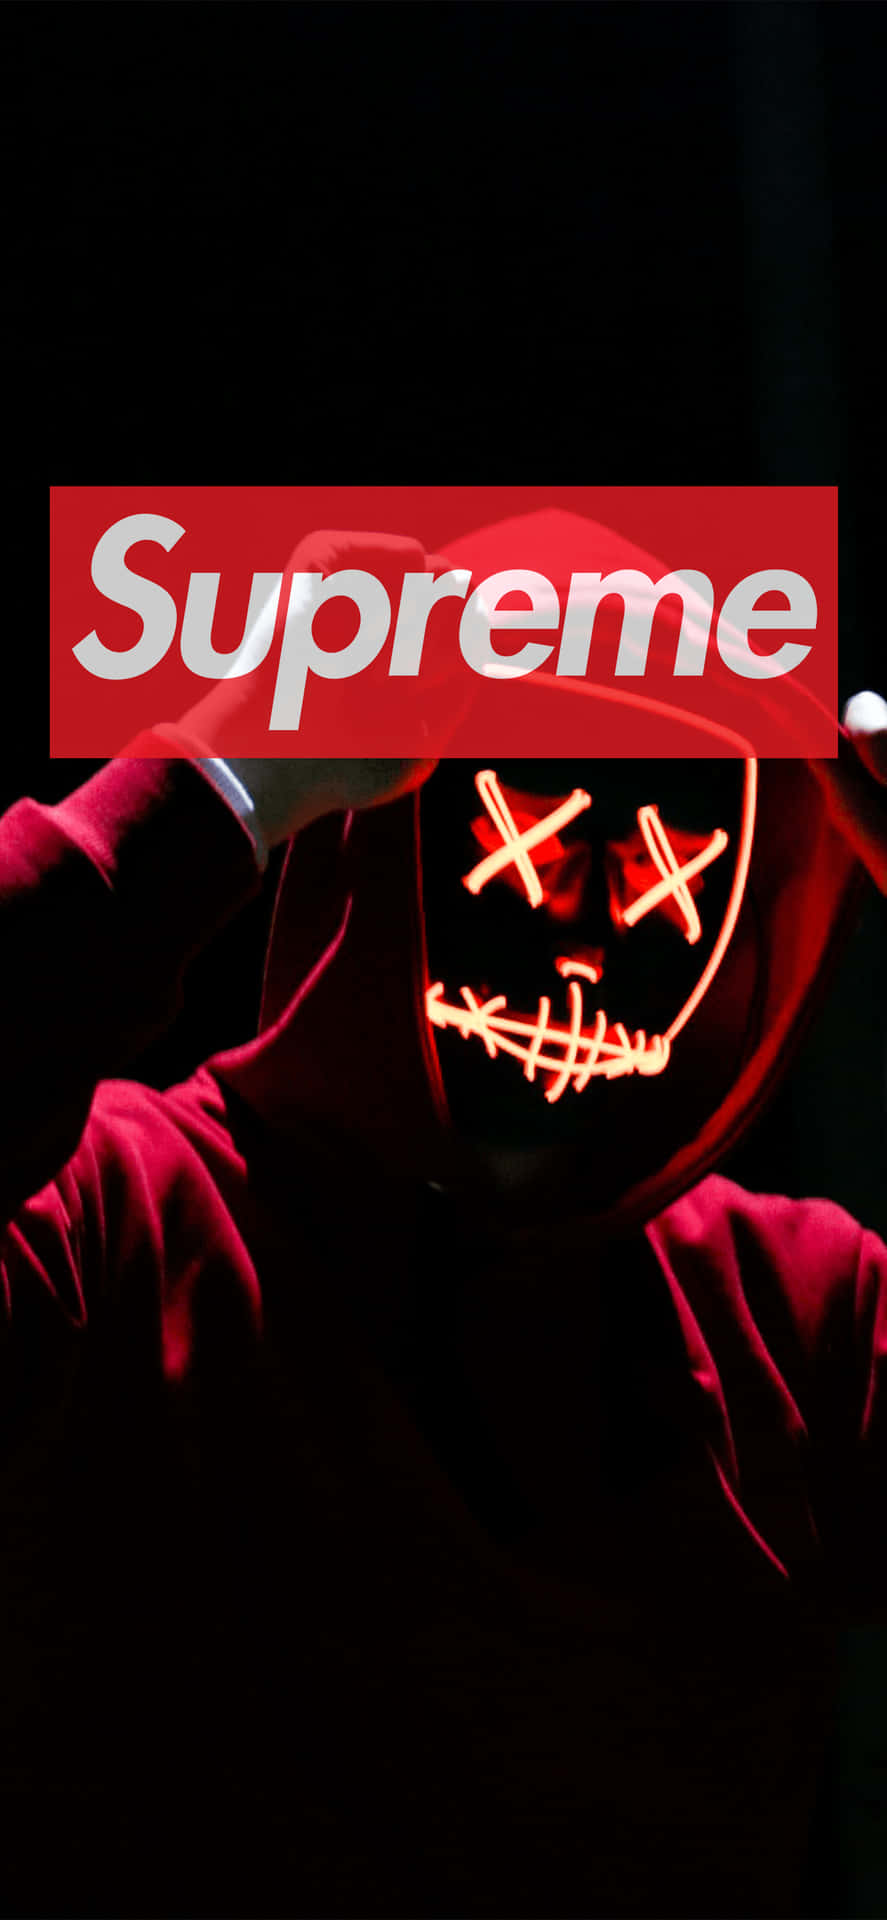 Download Supreme Logo in Red and White Wallpaper